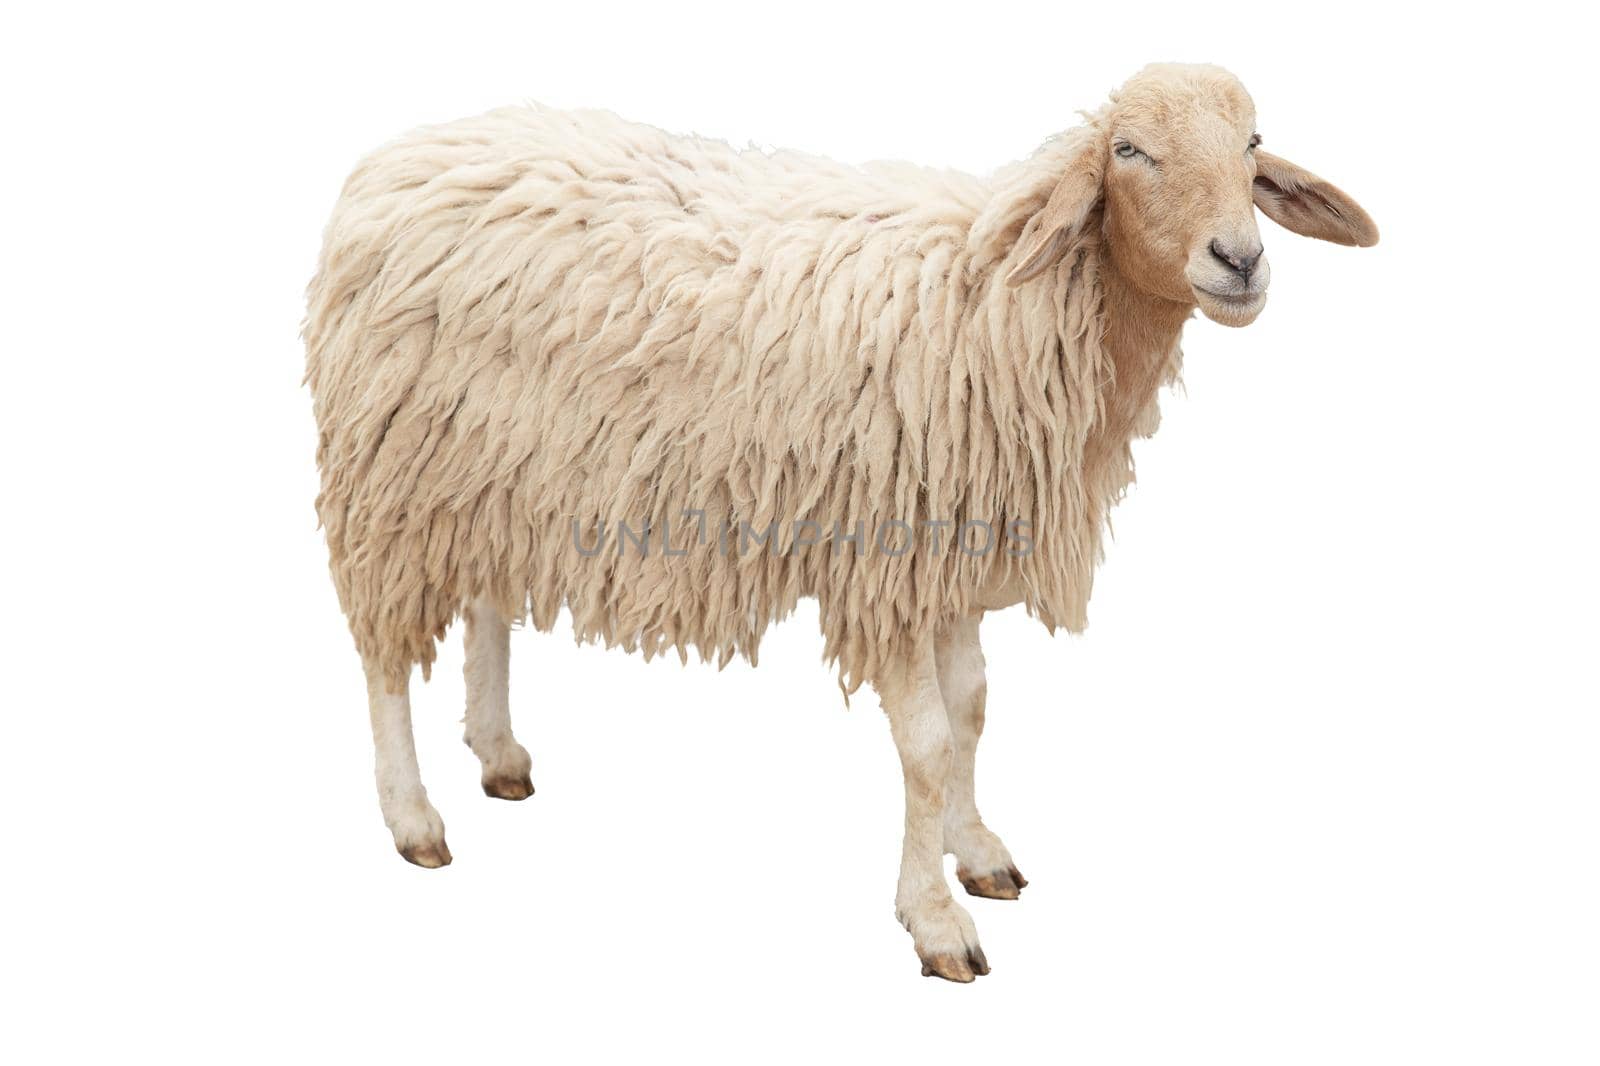 The Sheep full body standing isolated on white background with clipping path.